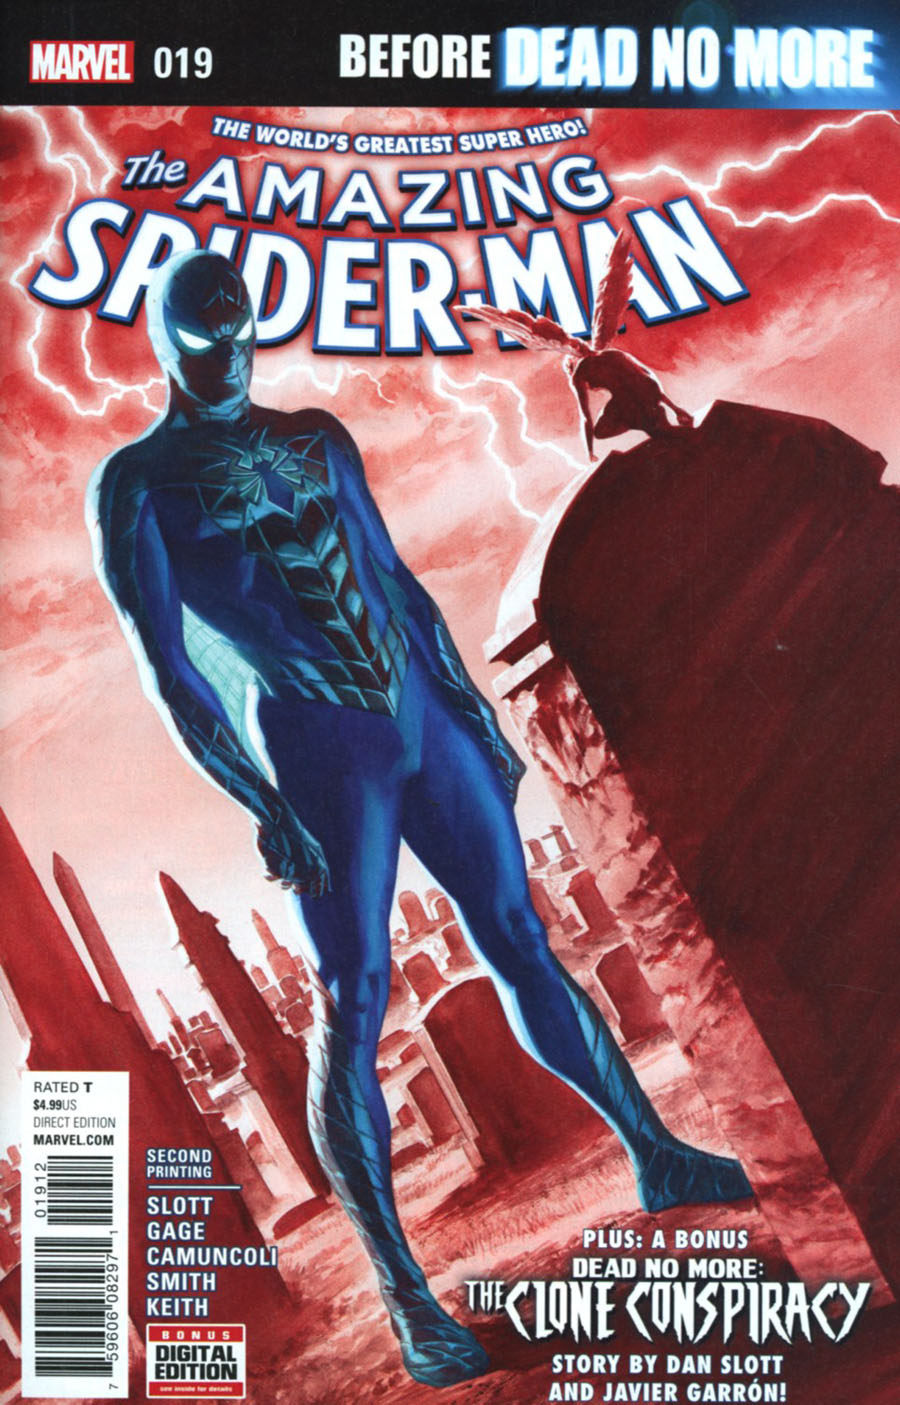 Amazing Spider-Man Vol 4 #19 Cover C 2nd Ptg Alex Ross Variant Cover (Dead No More Prelude)